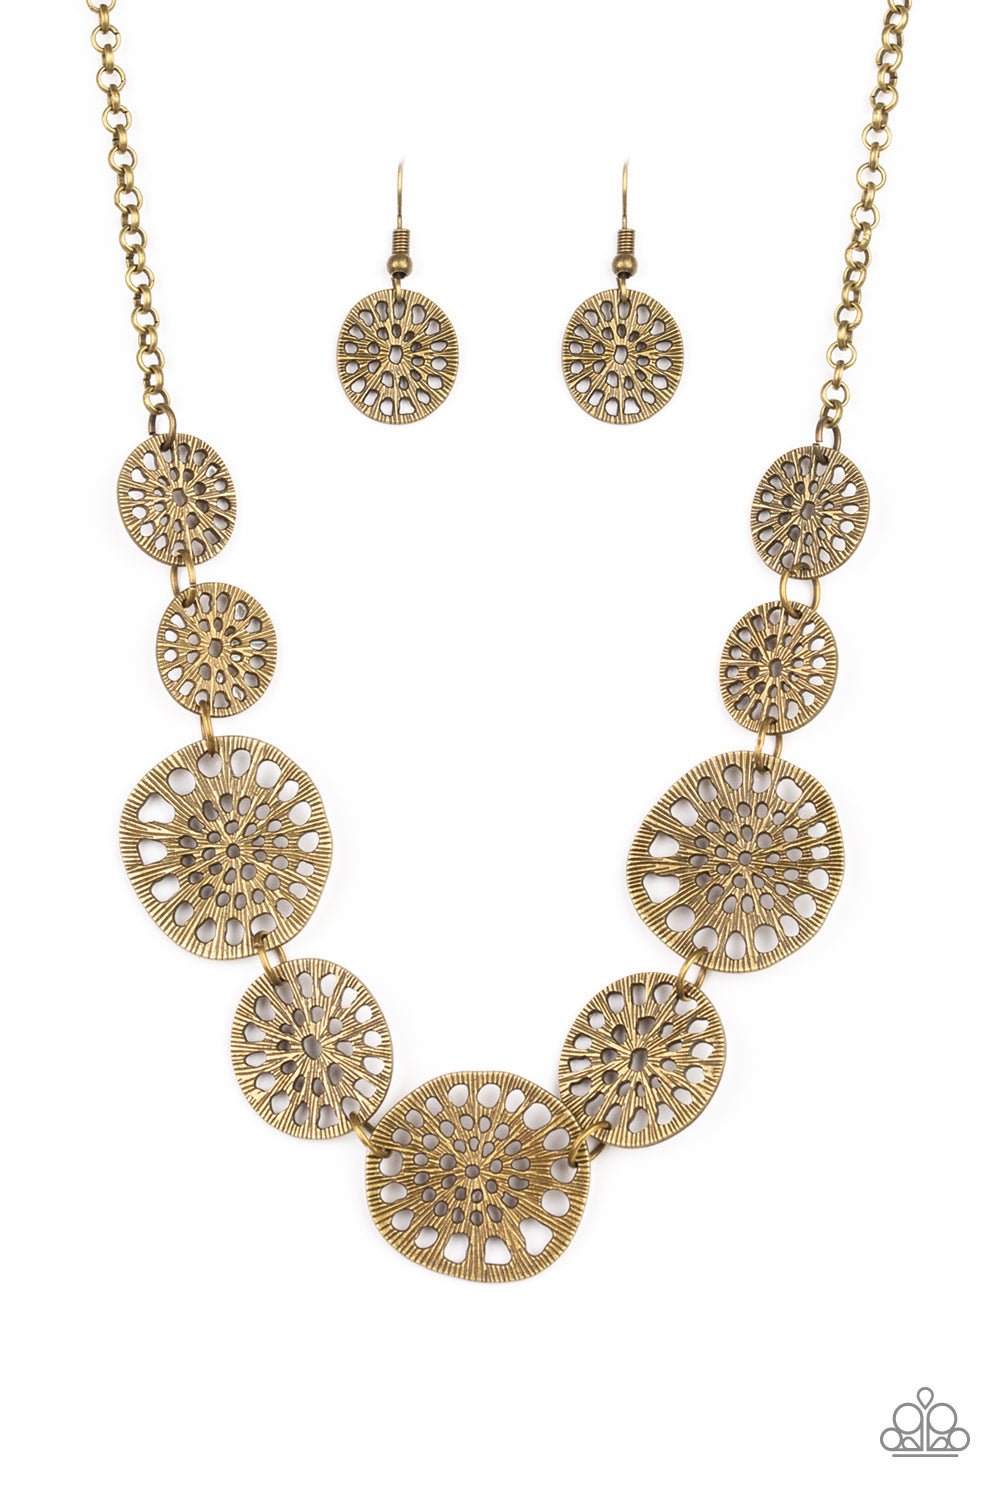 Your Own Free WHEEL - Brass Necklace Set - Princess Glam Shop